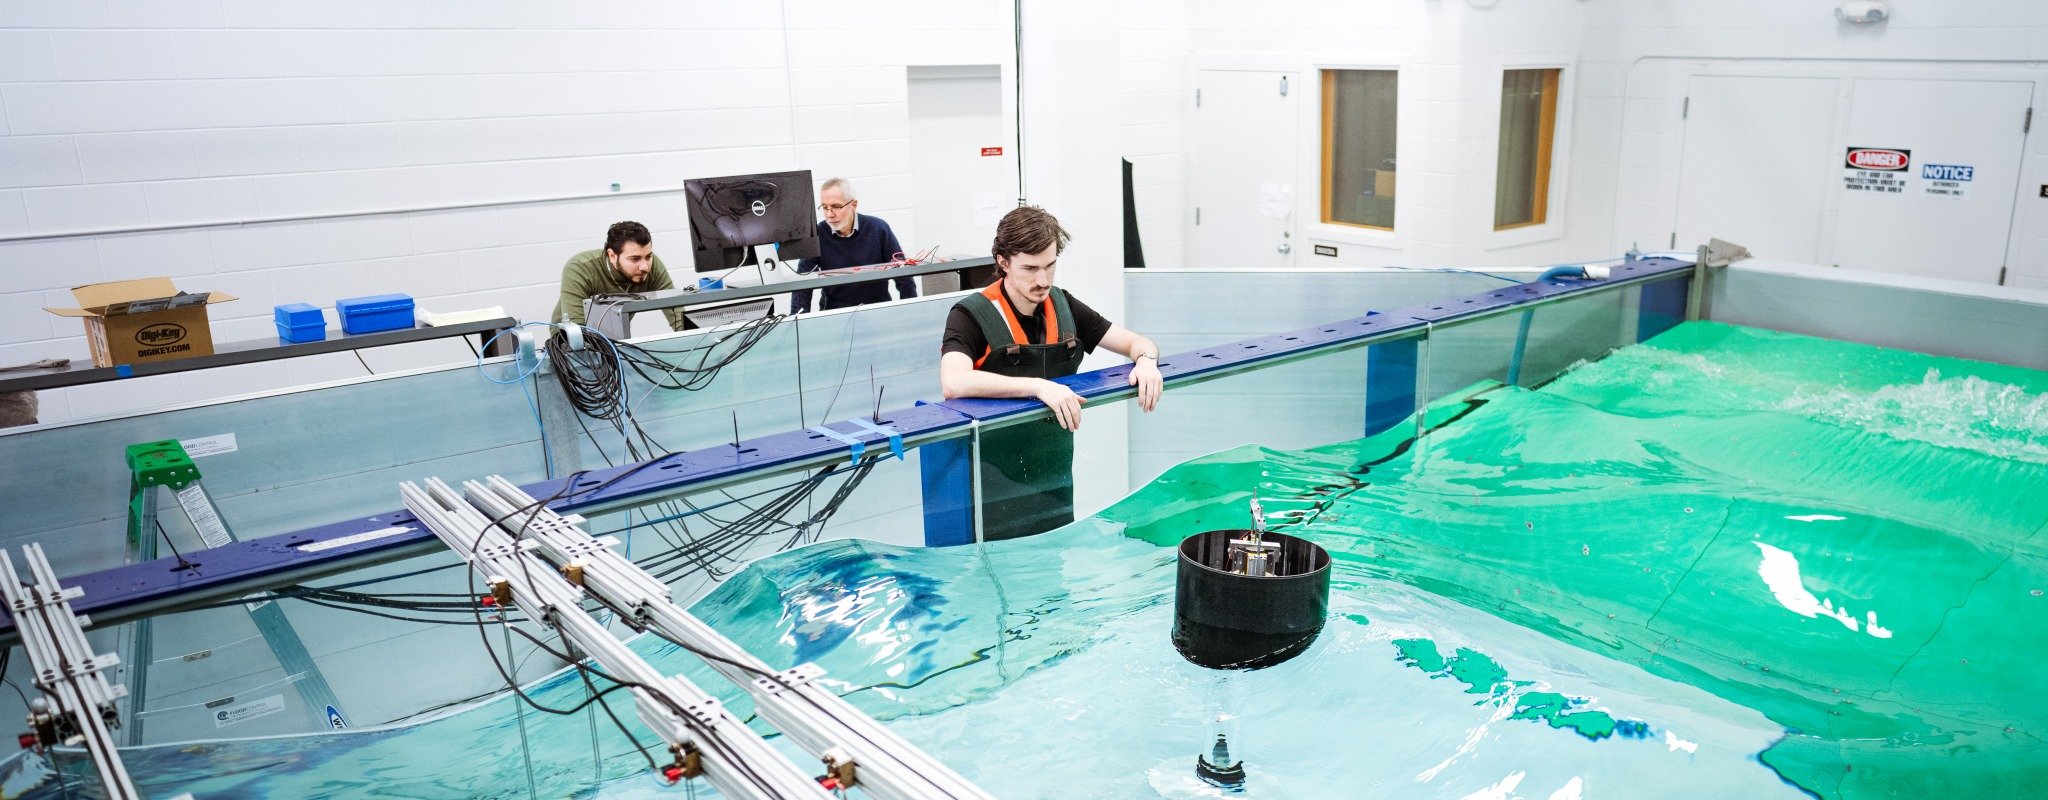 Professor Gordon Parker leads students in a demonstration of a Wave Energy Converter in the Wave Pool located inside the ME-EM Building.